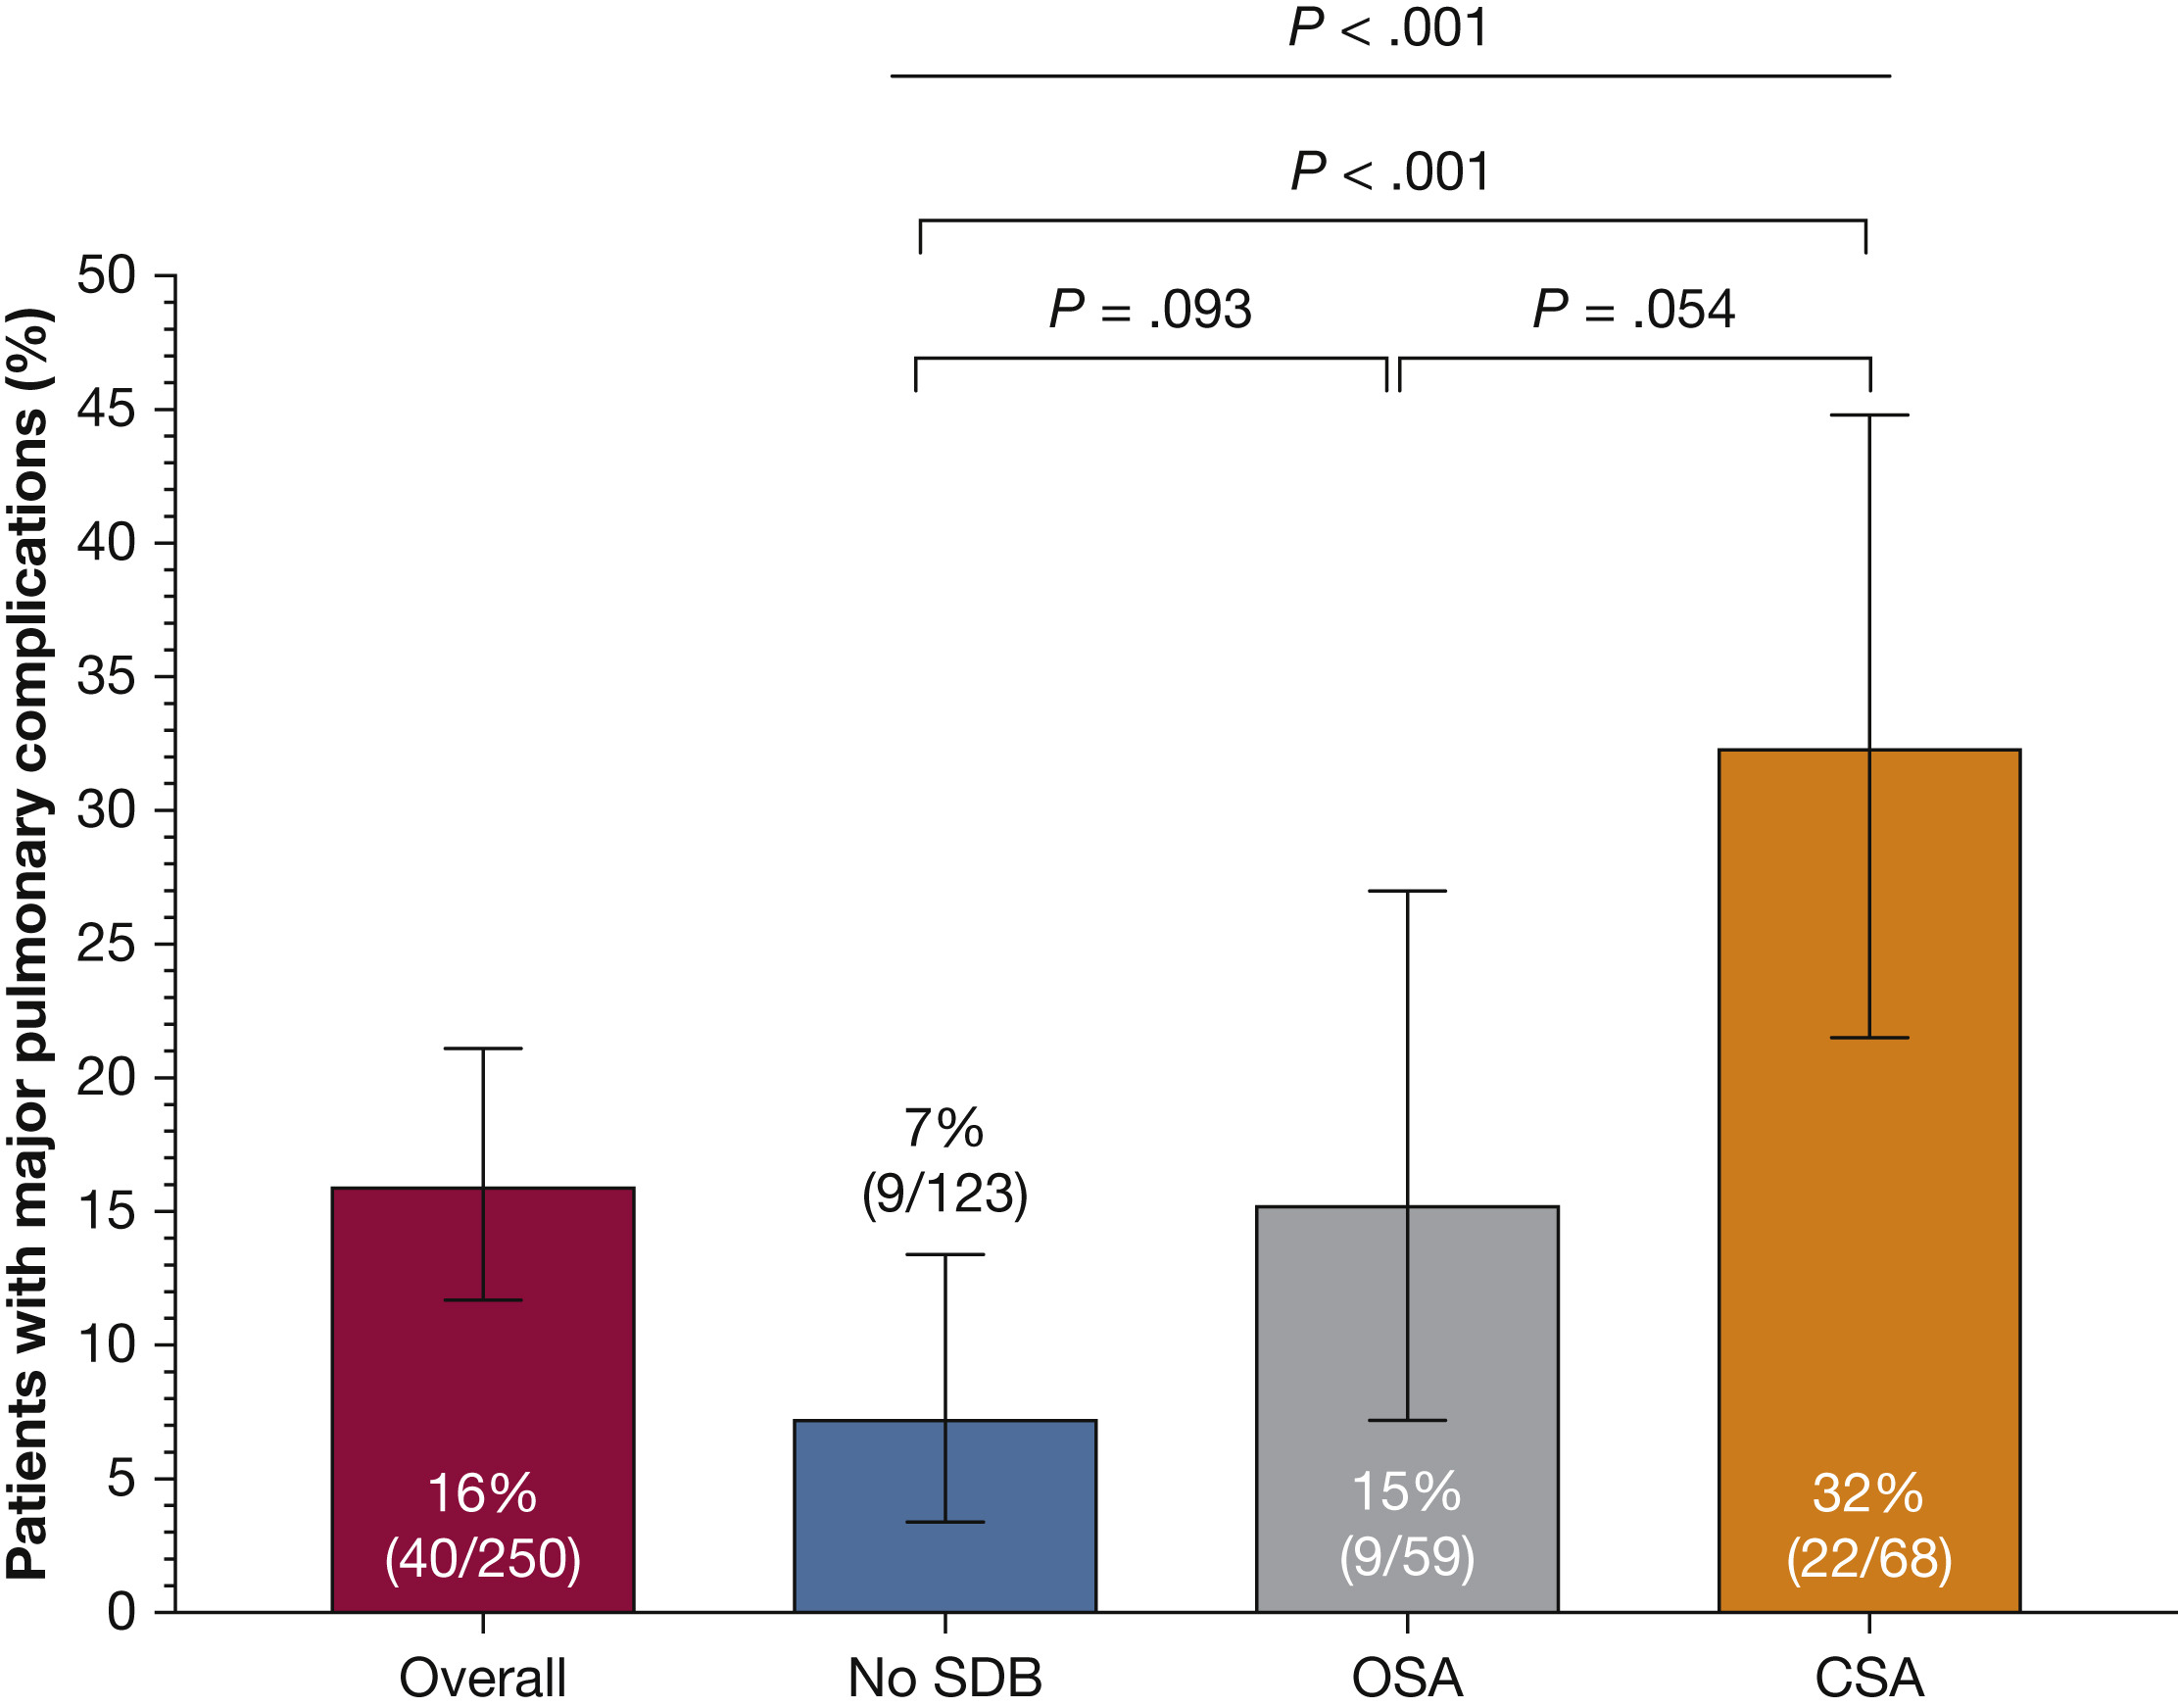 Incidence of postoperative major pulmonary complications without the presence of sleep-disordered breathing and with OSA and CSA.